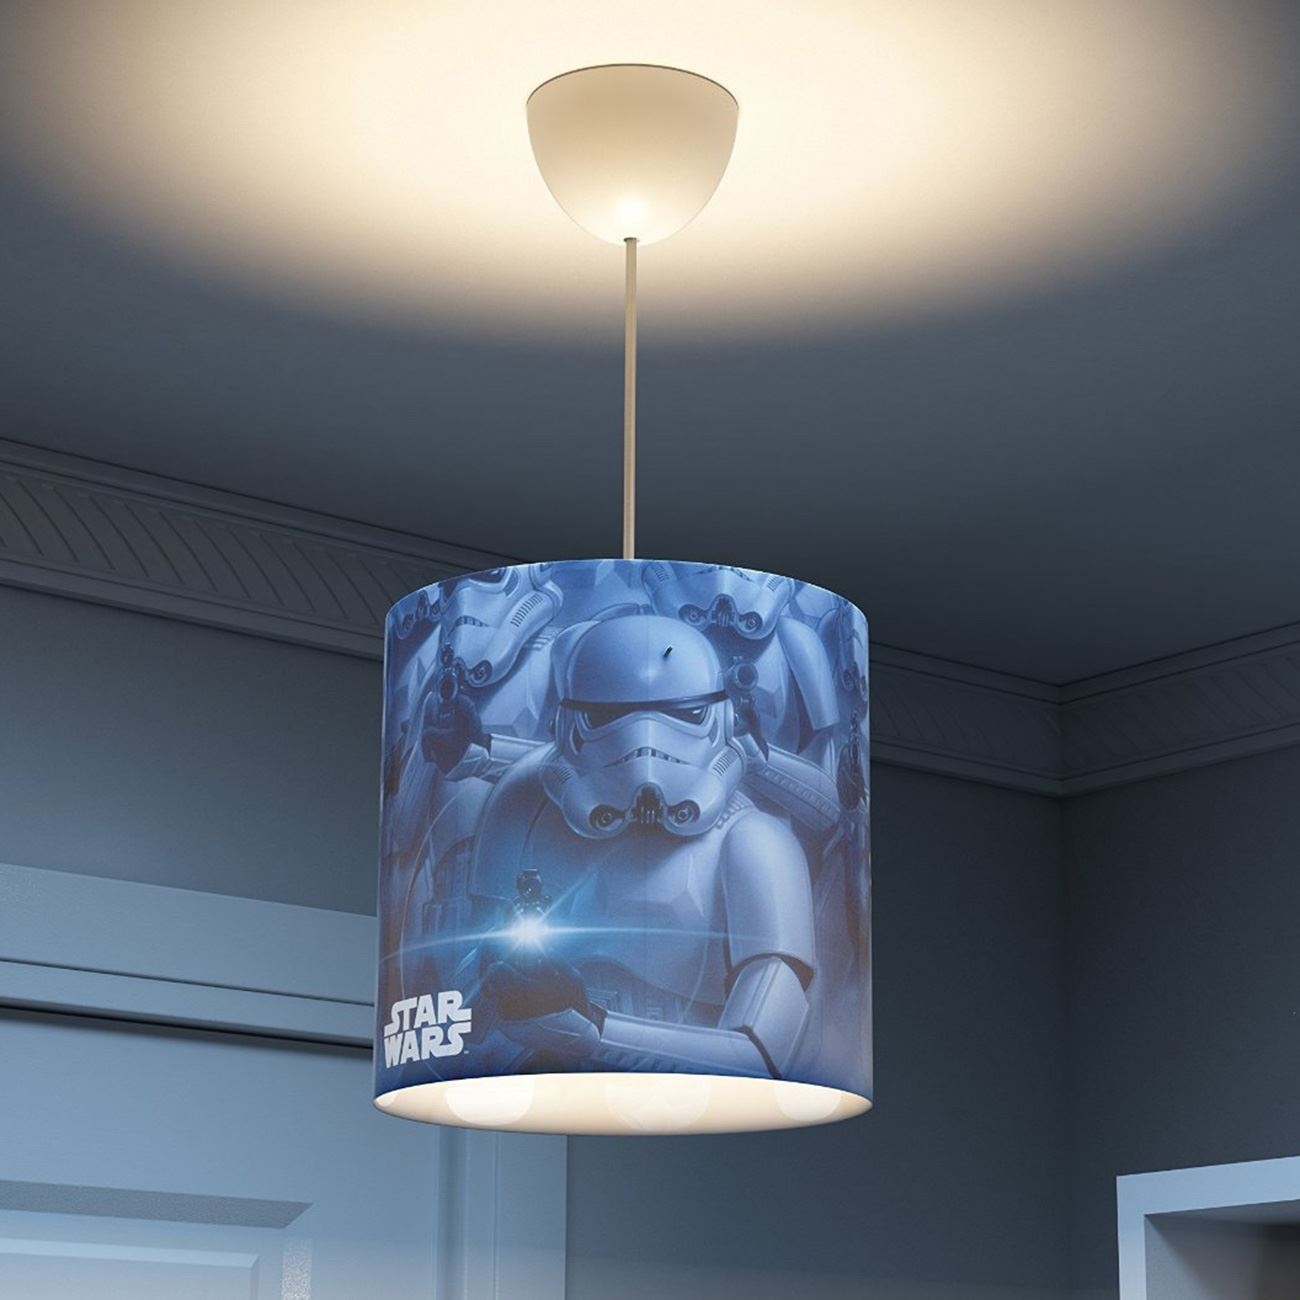 Permalink to Star Wars Ceiling Light Fixture